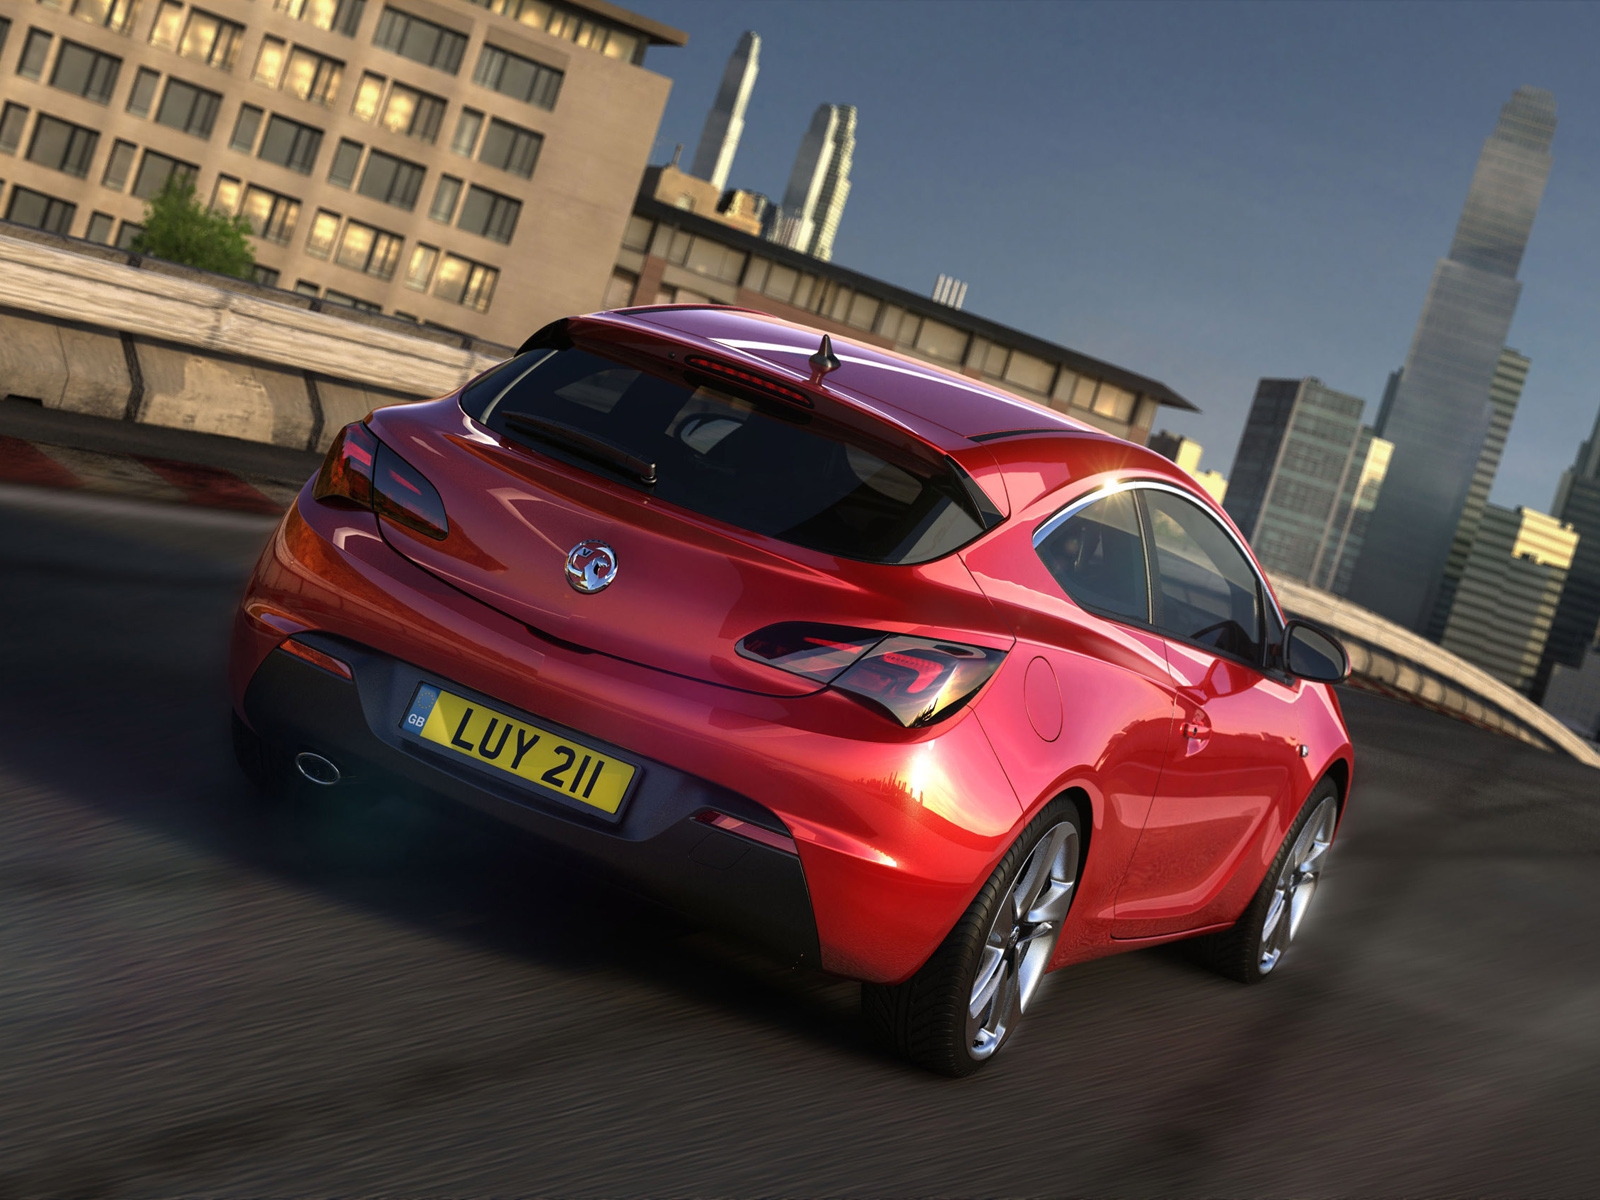 2012 Vauxhall Astra GTC Speed for 1600 x 1200 resolution